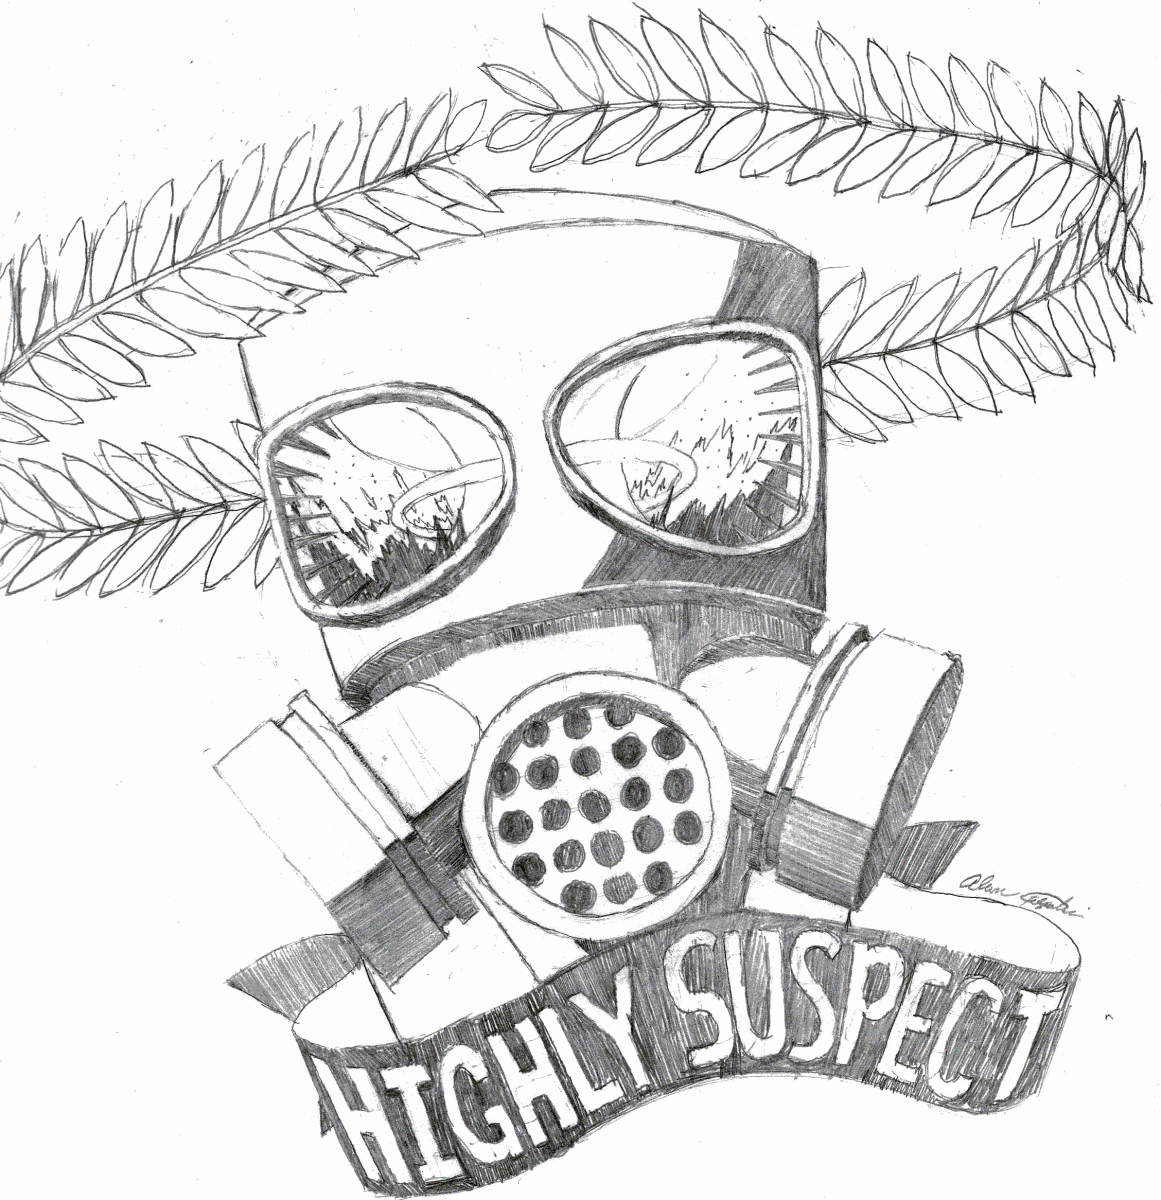 Highly Suspect sketch